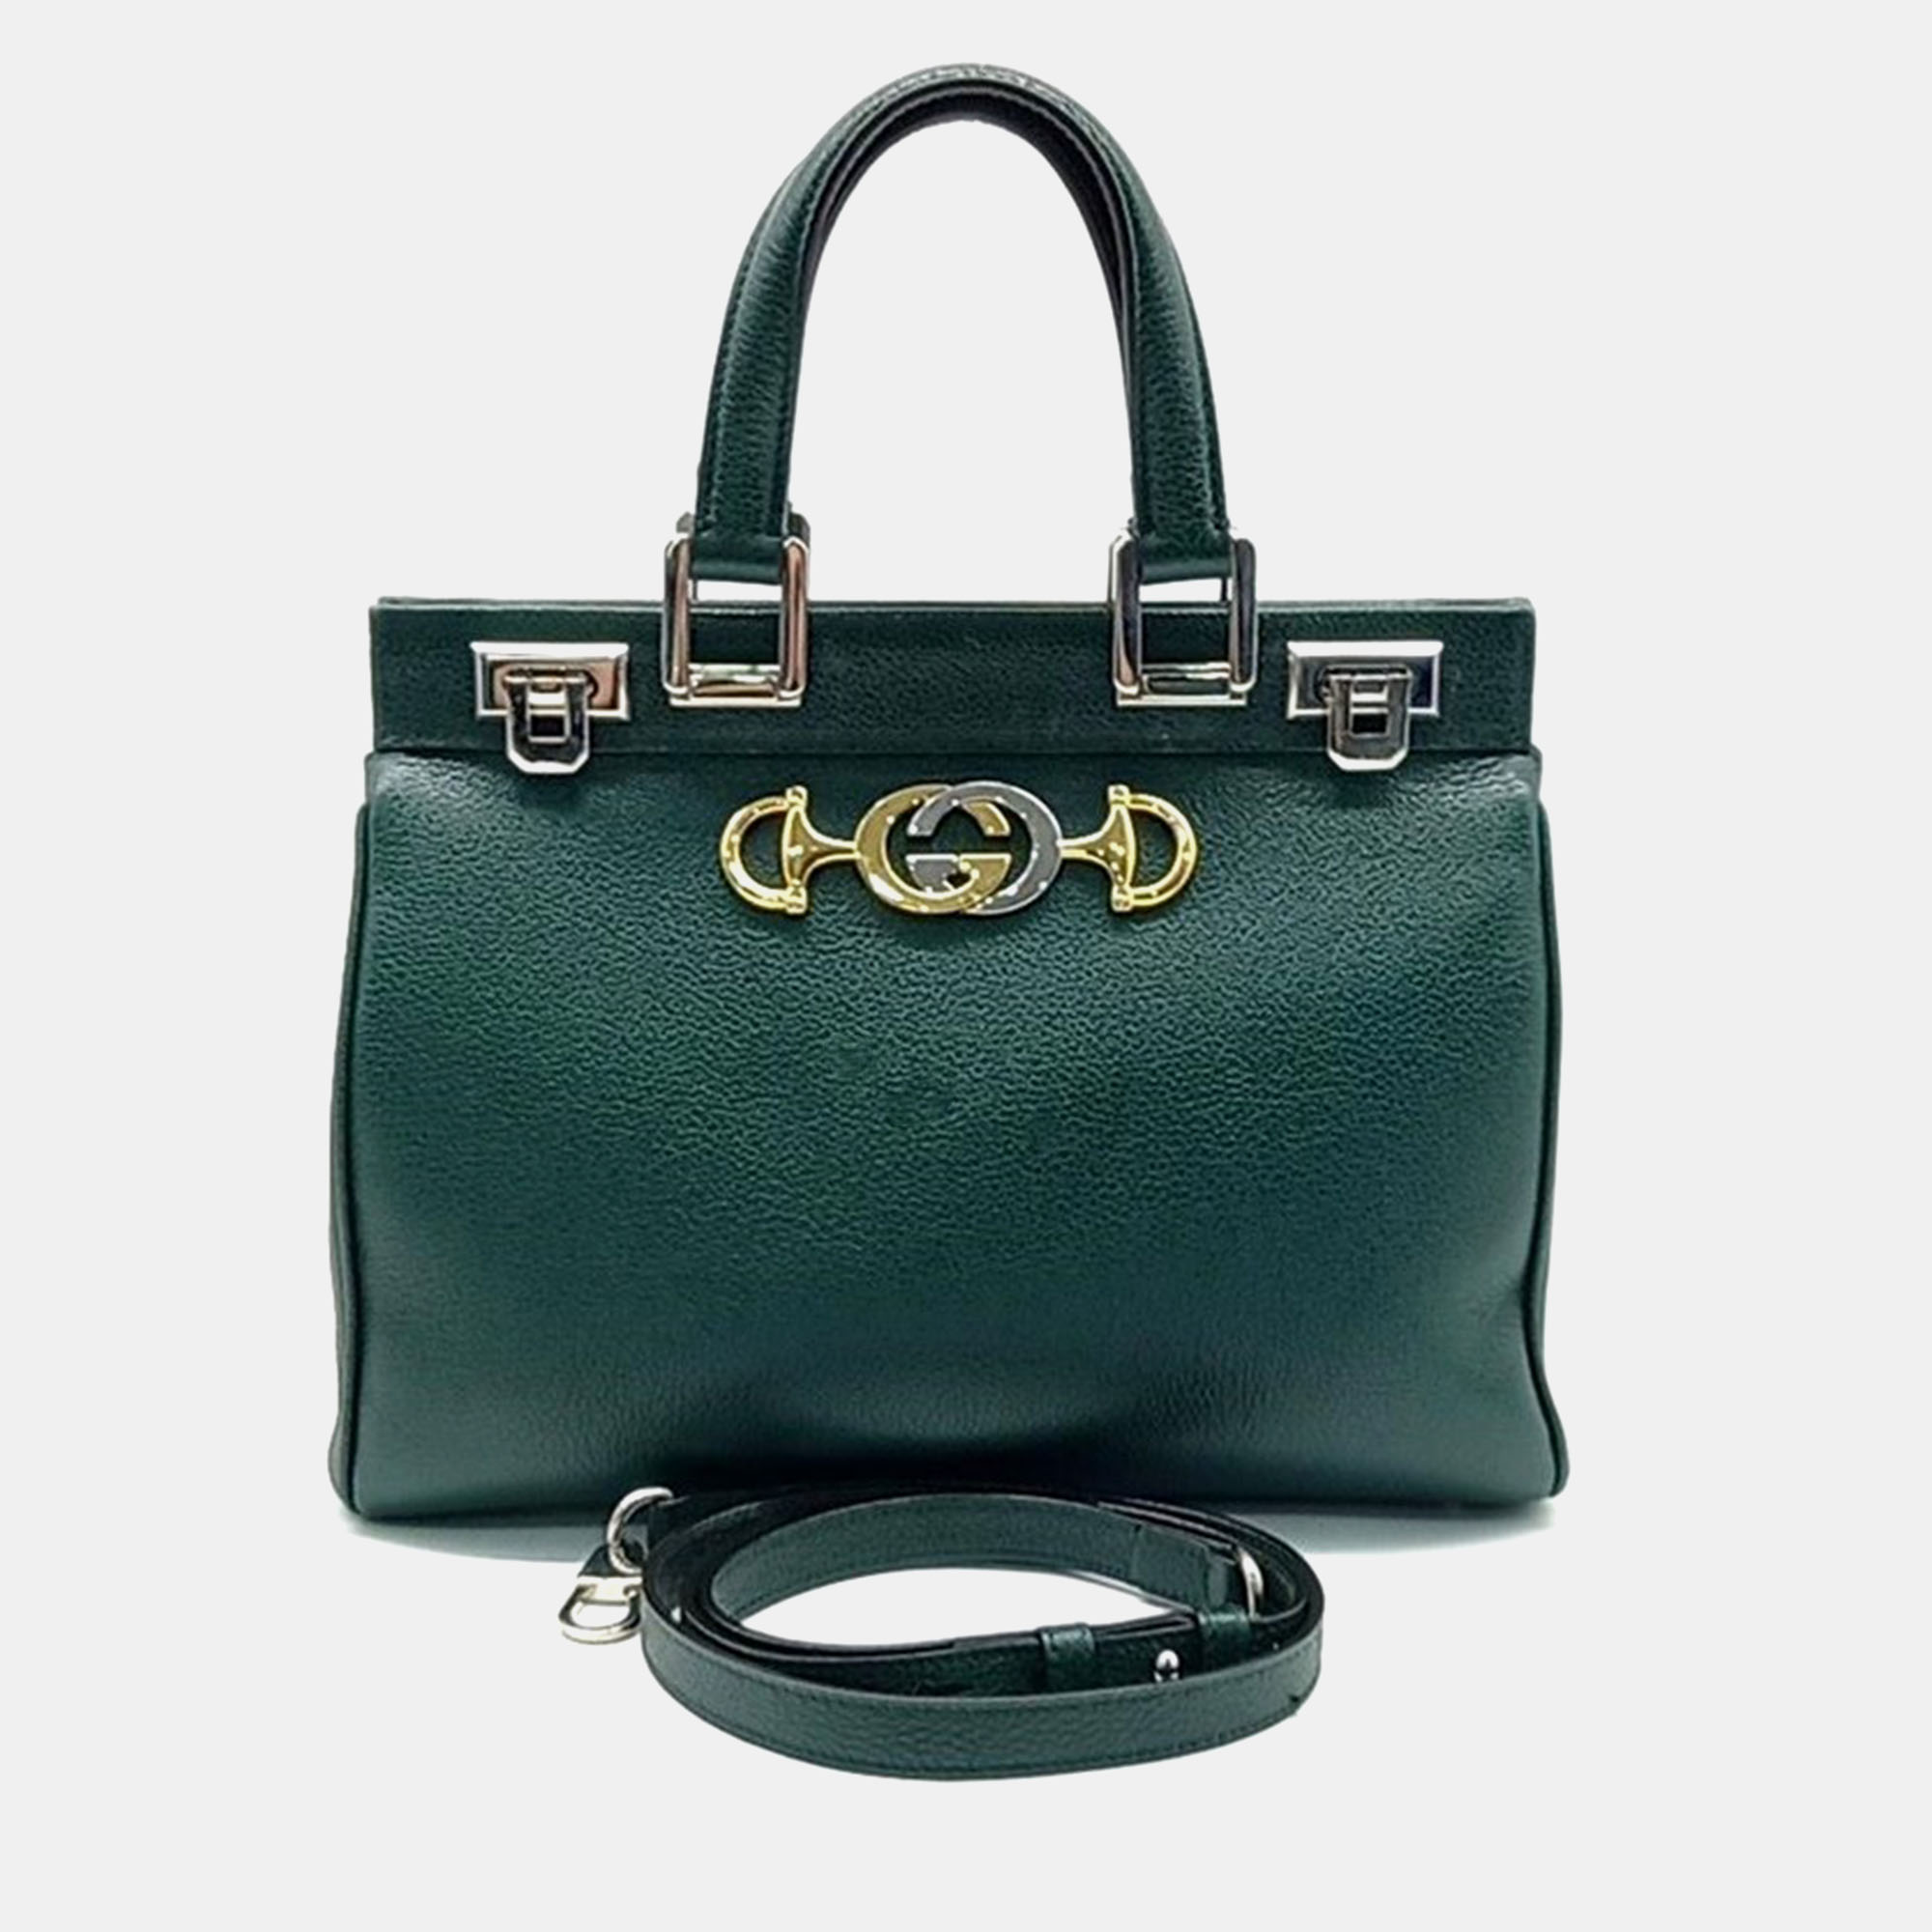 Gucci green leather small zumi top handle bag